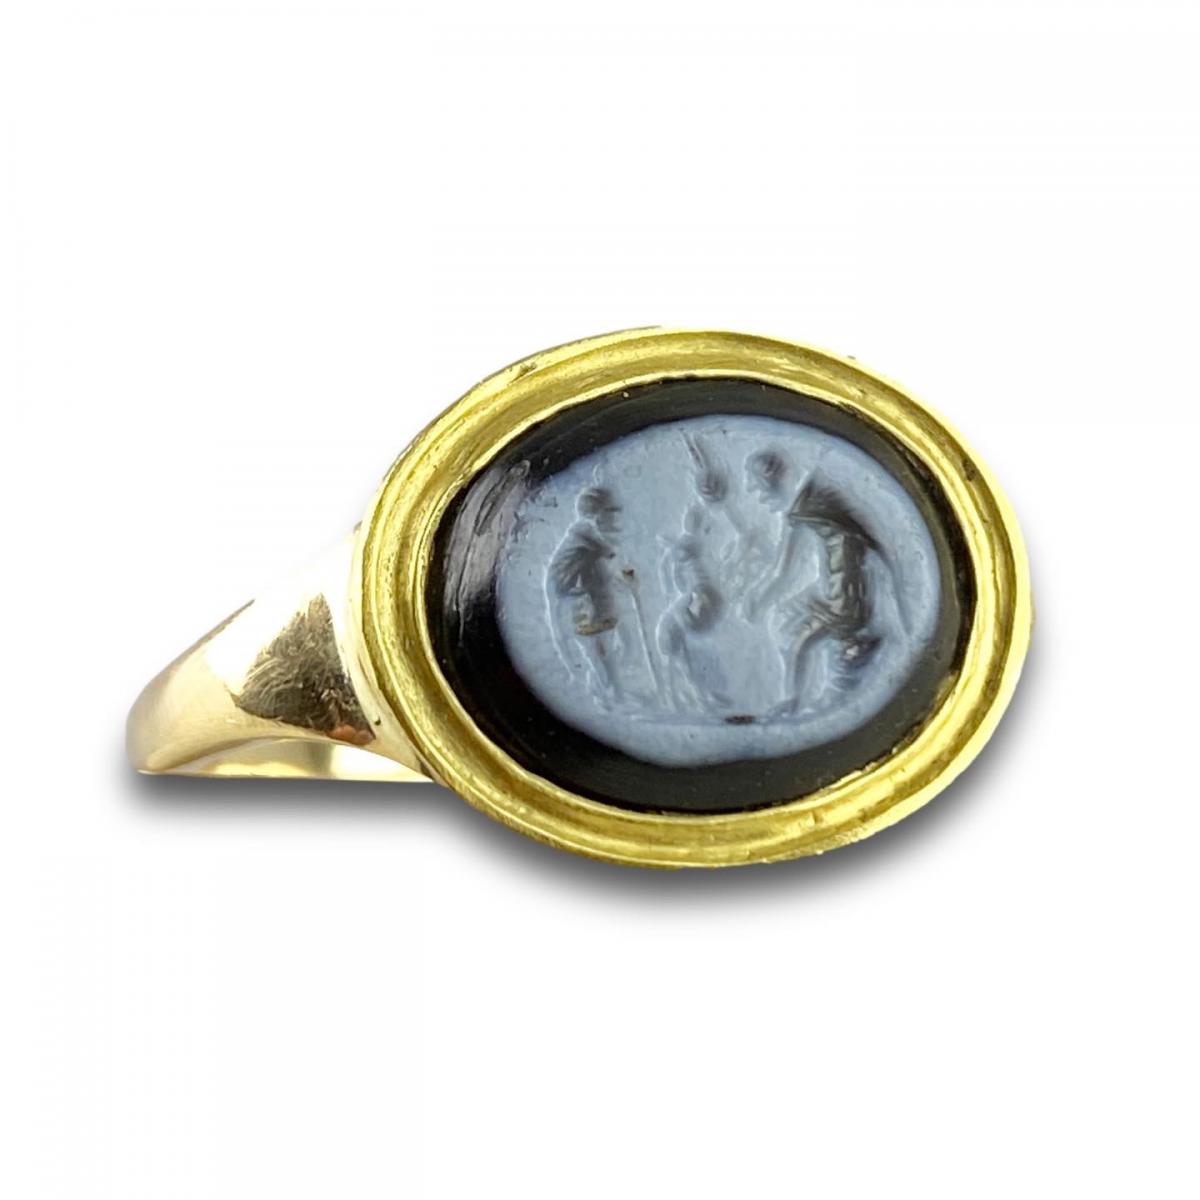 Ring set with a Roman Nicolo intaglio. 2nd century A.D, later gold ring